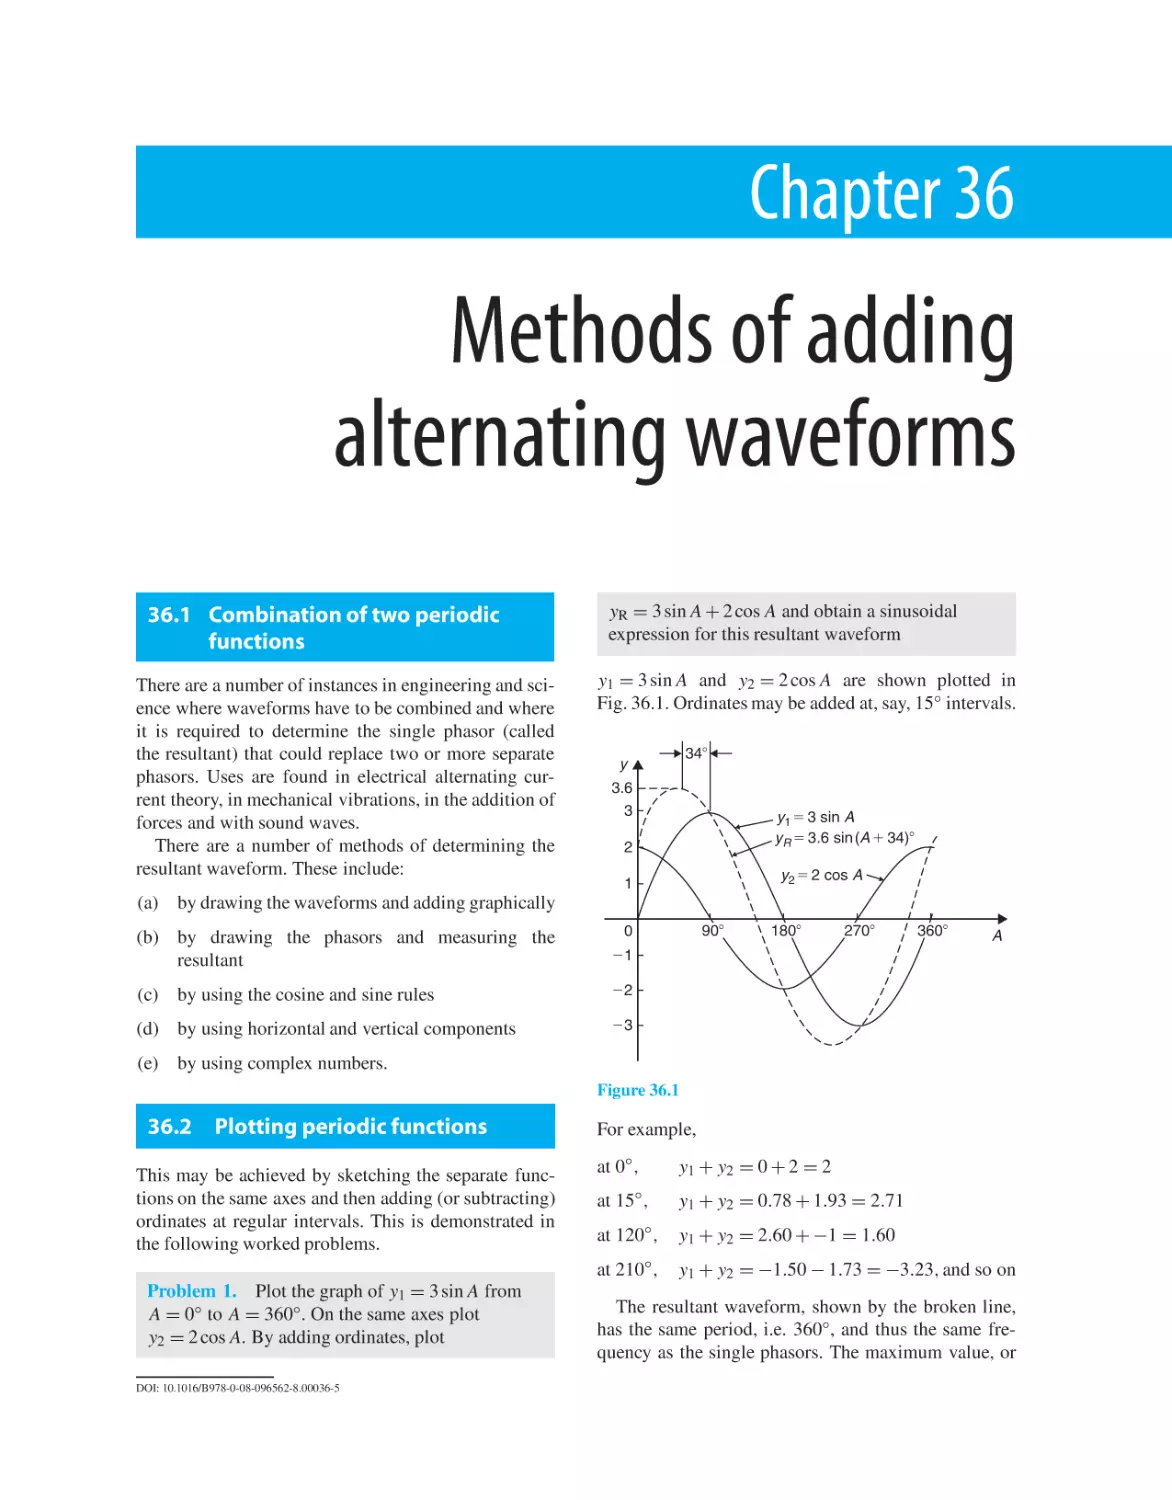 Chapter 36. Methods of adding alternating waveforms
36.1 Combination of two periodic functions
36.2 Plotting periodic functions